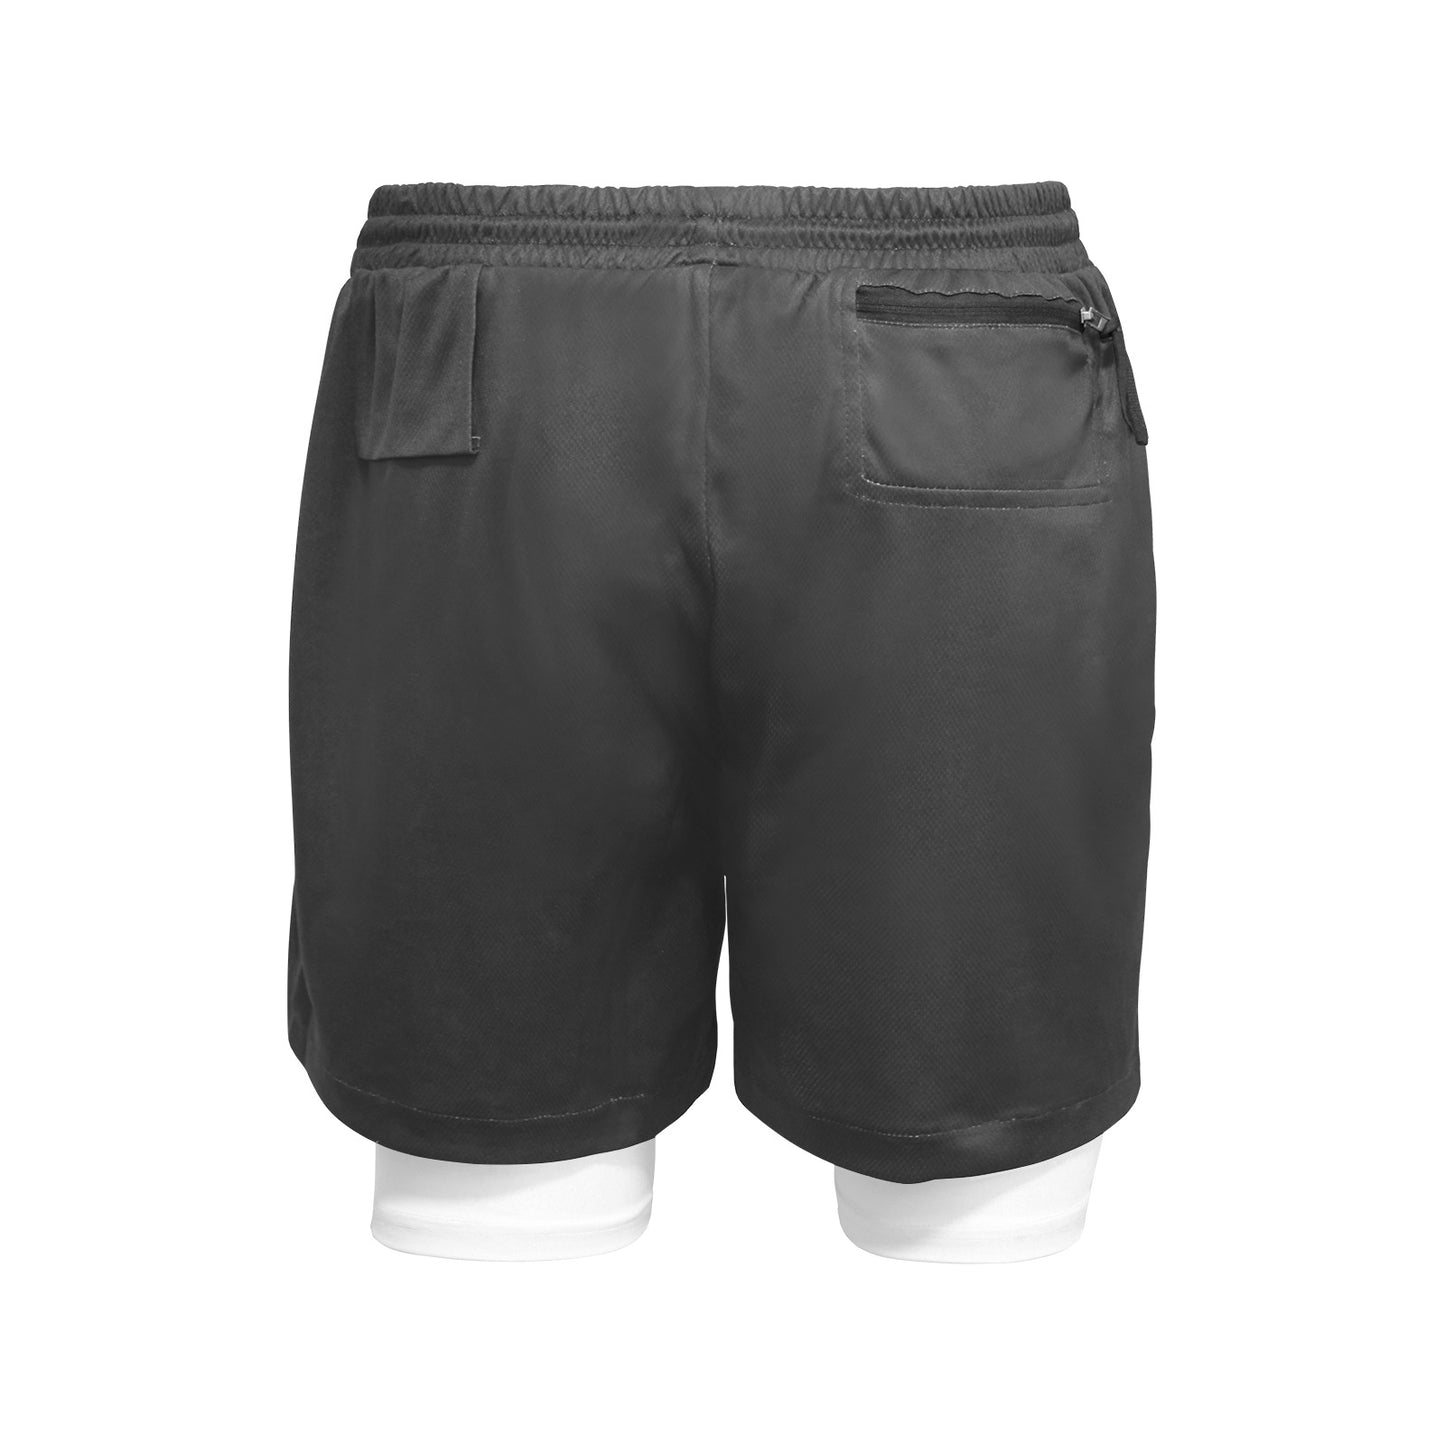 Men's Black Sports Shorts with Liner